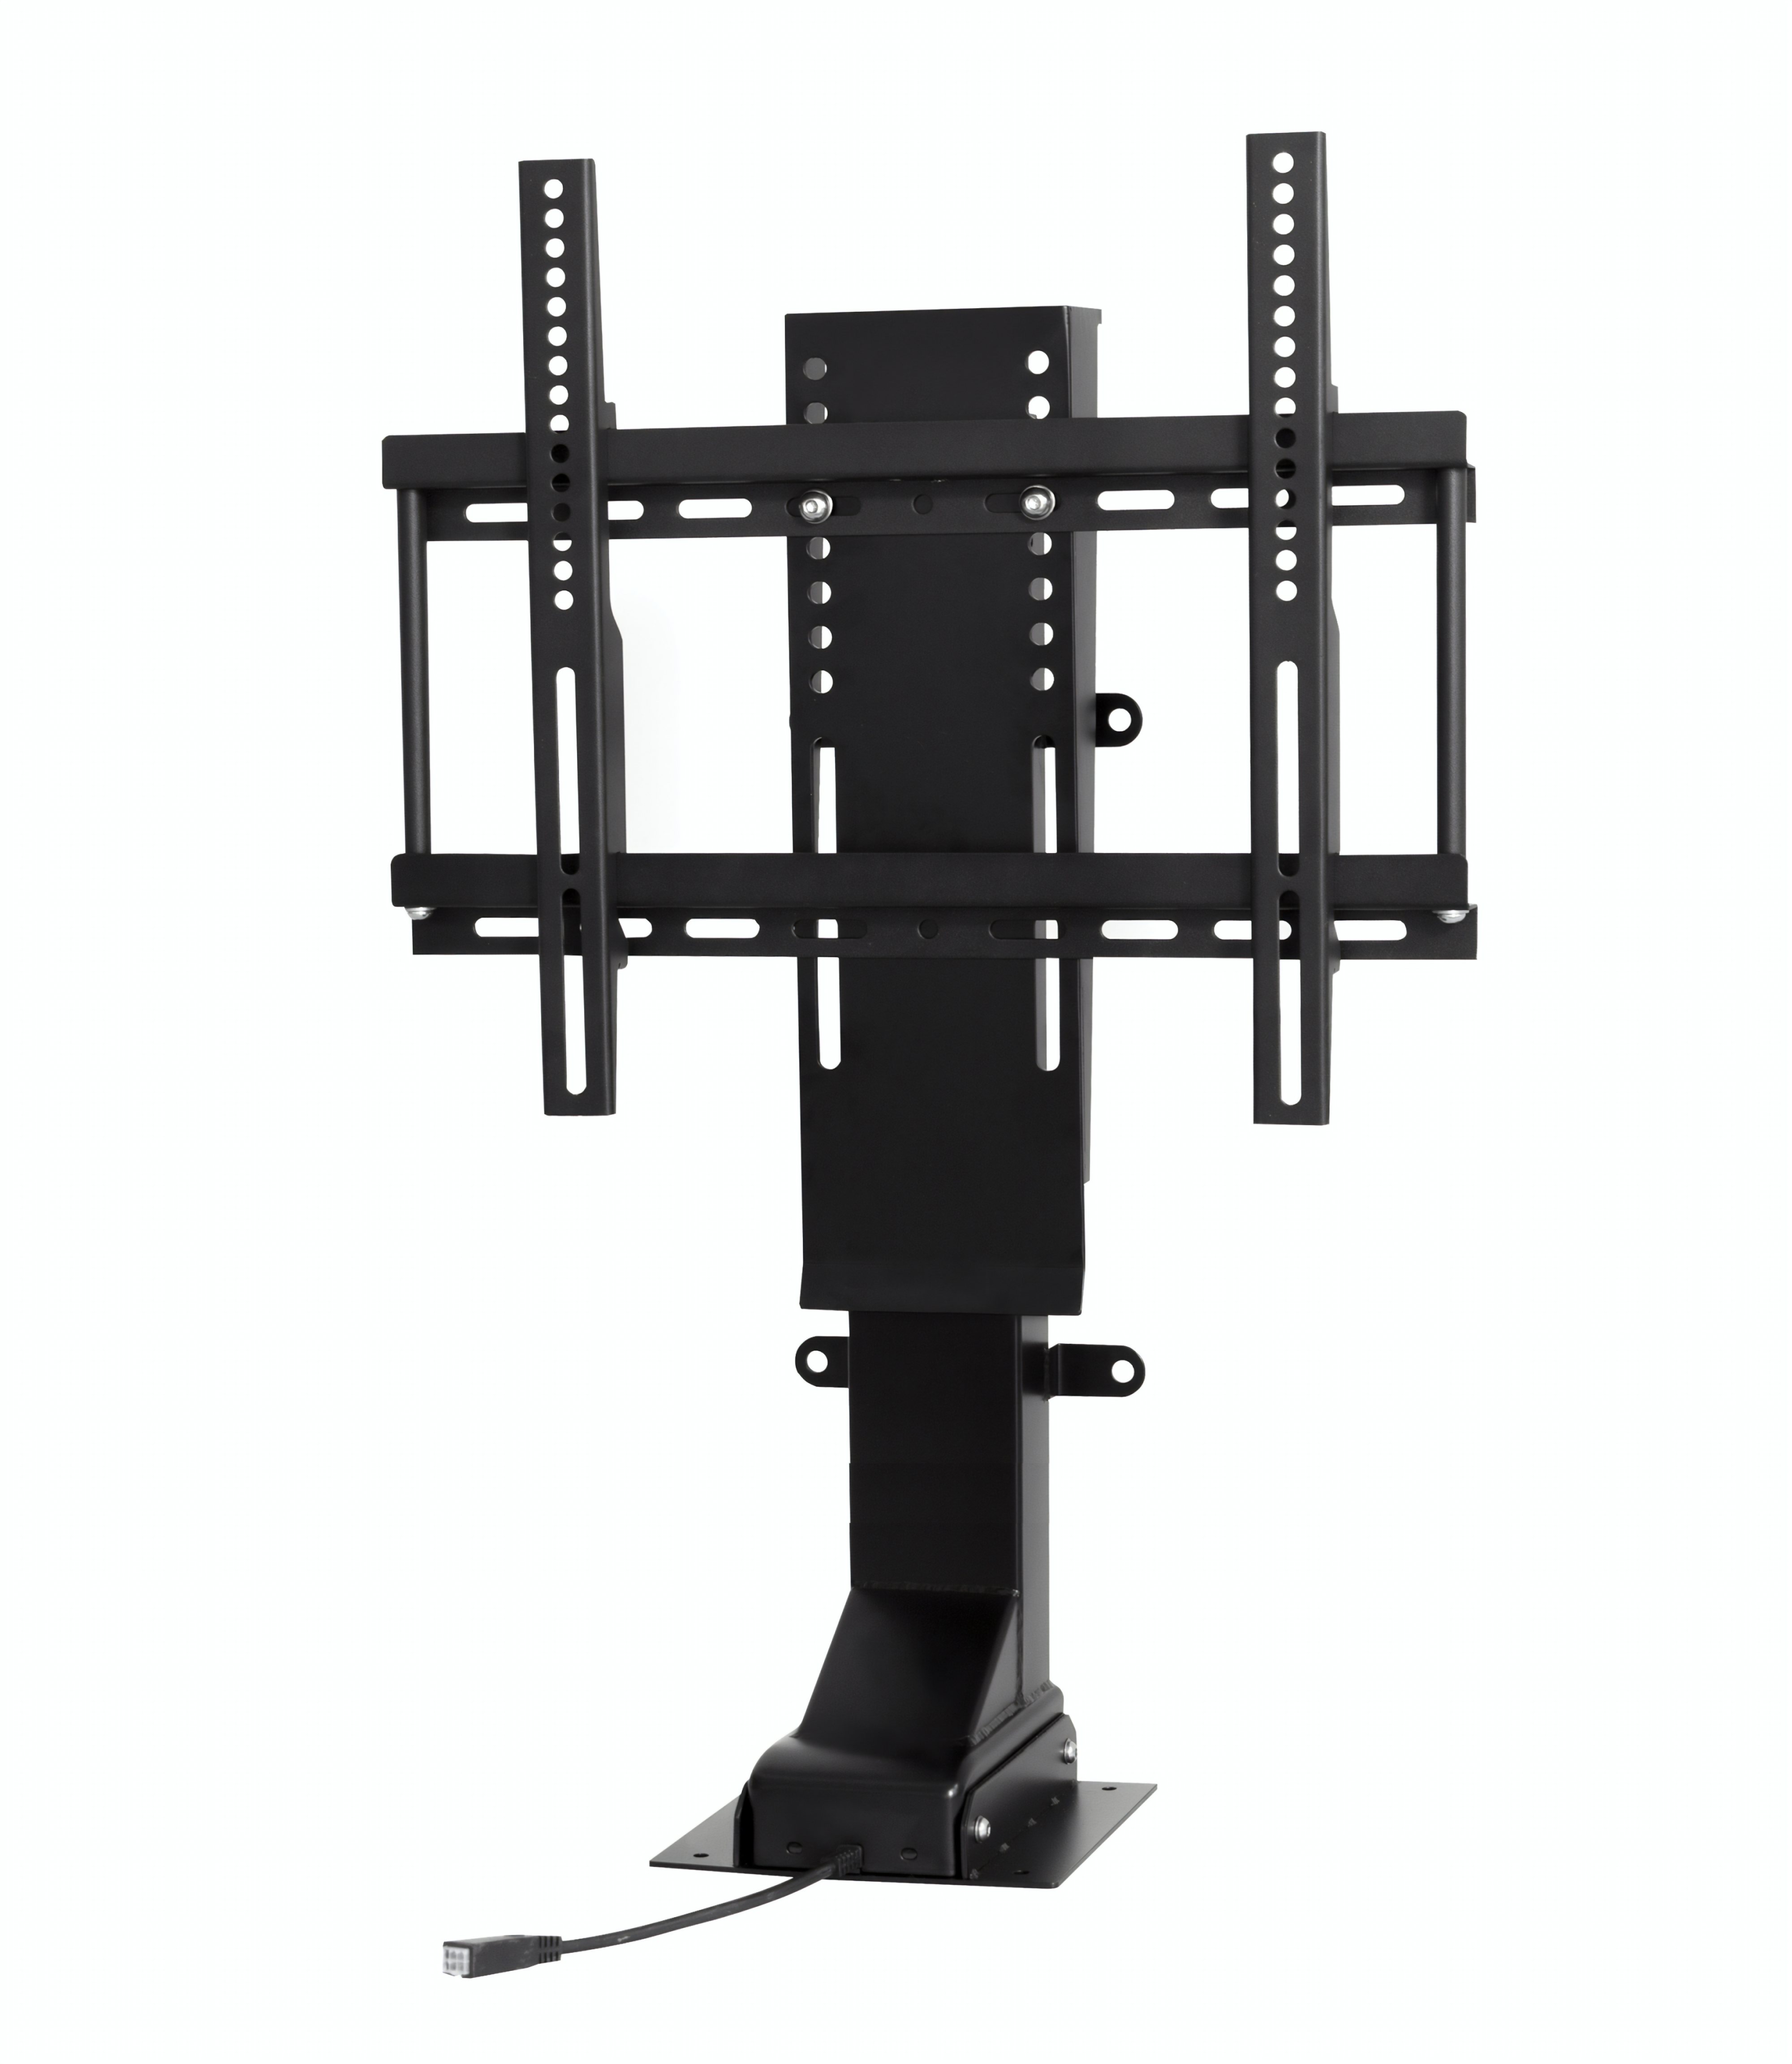 SRV 32800 Pro TV Lift Mechanism Touchstone Home Products, Inc.